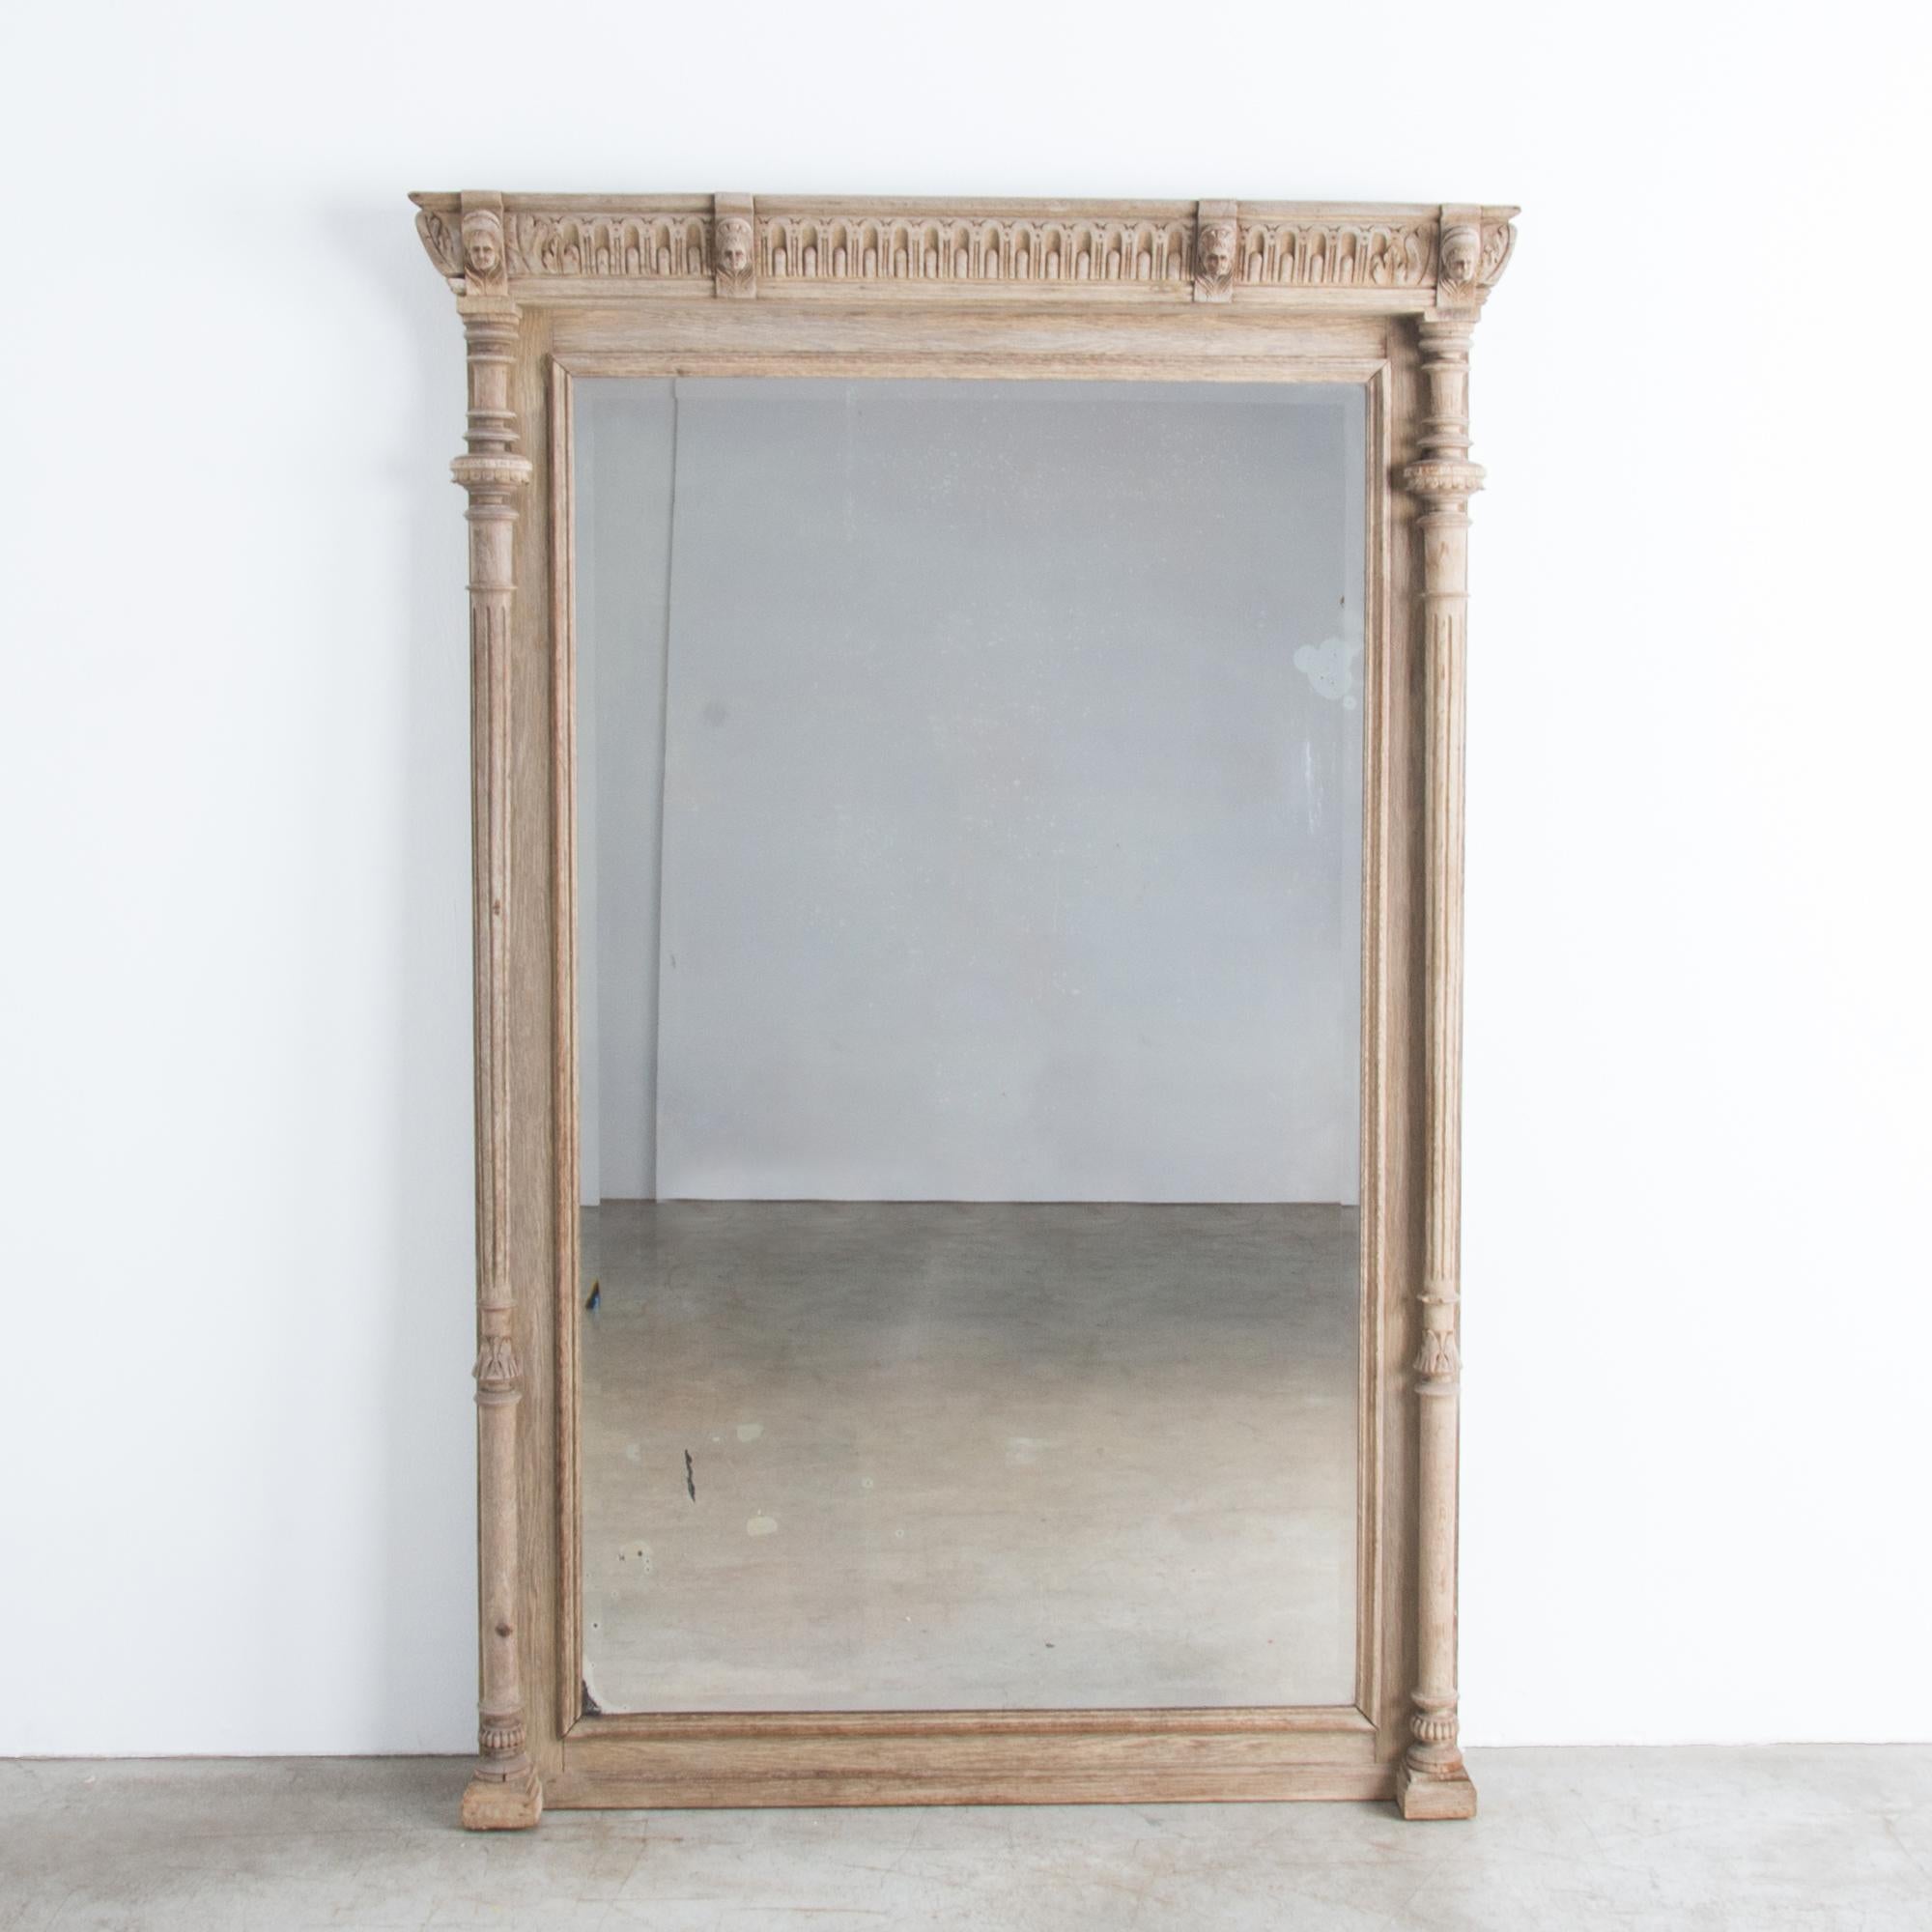 An antique floor mirror from Belgium, circa 1900, with a handsomely carved wooden frame. Slender fluted columns support an ornate lintel, featuring a repeating ornamental motif punctuated by four corbels from which emerge beautifully detailed carved